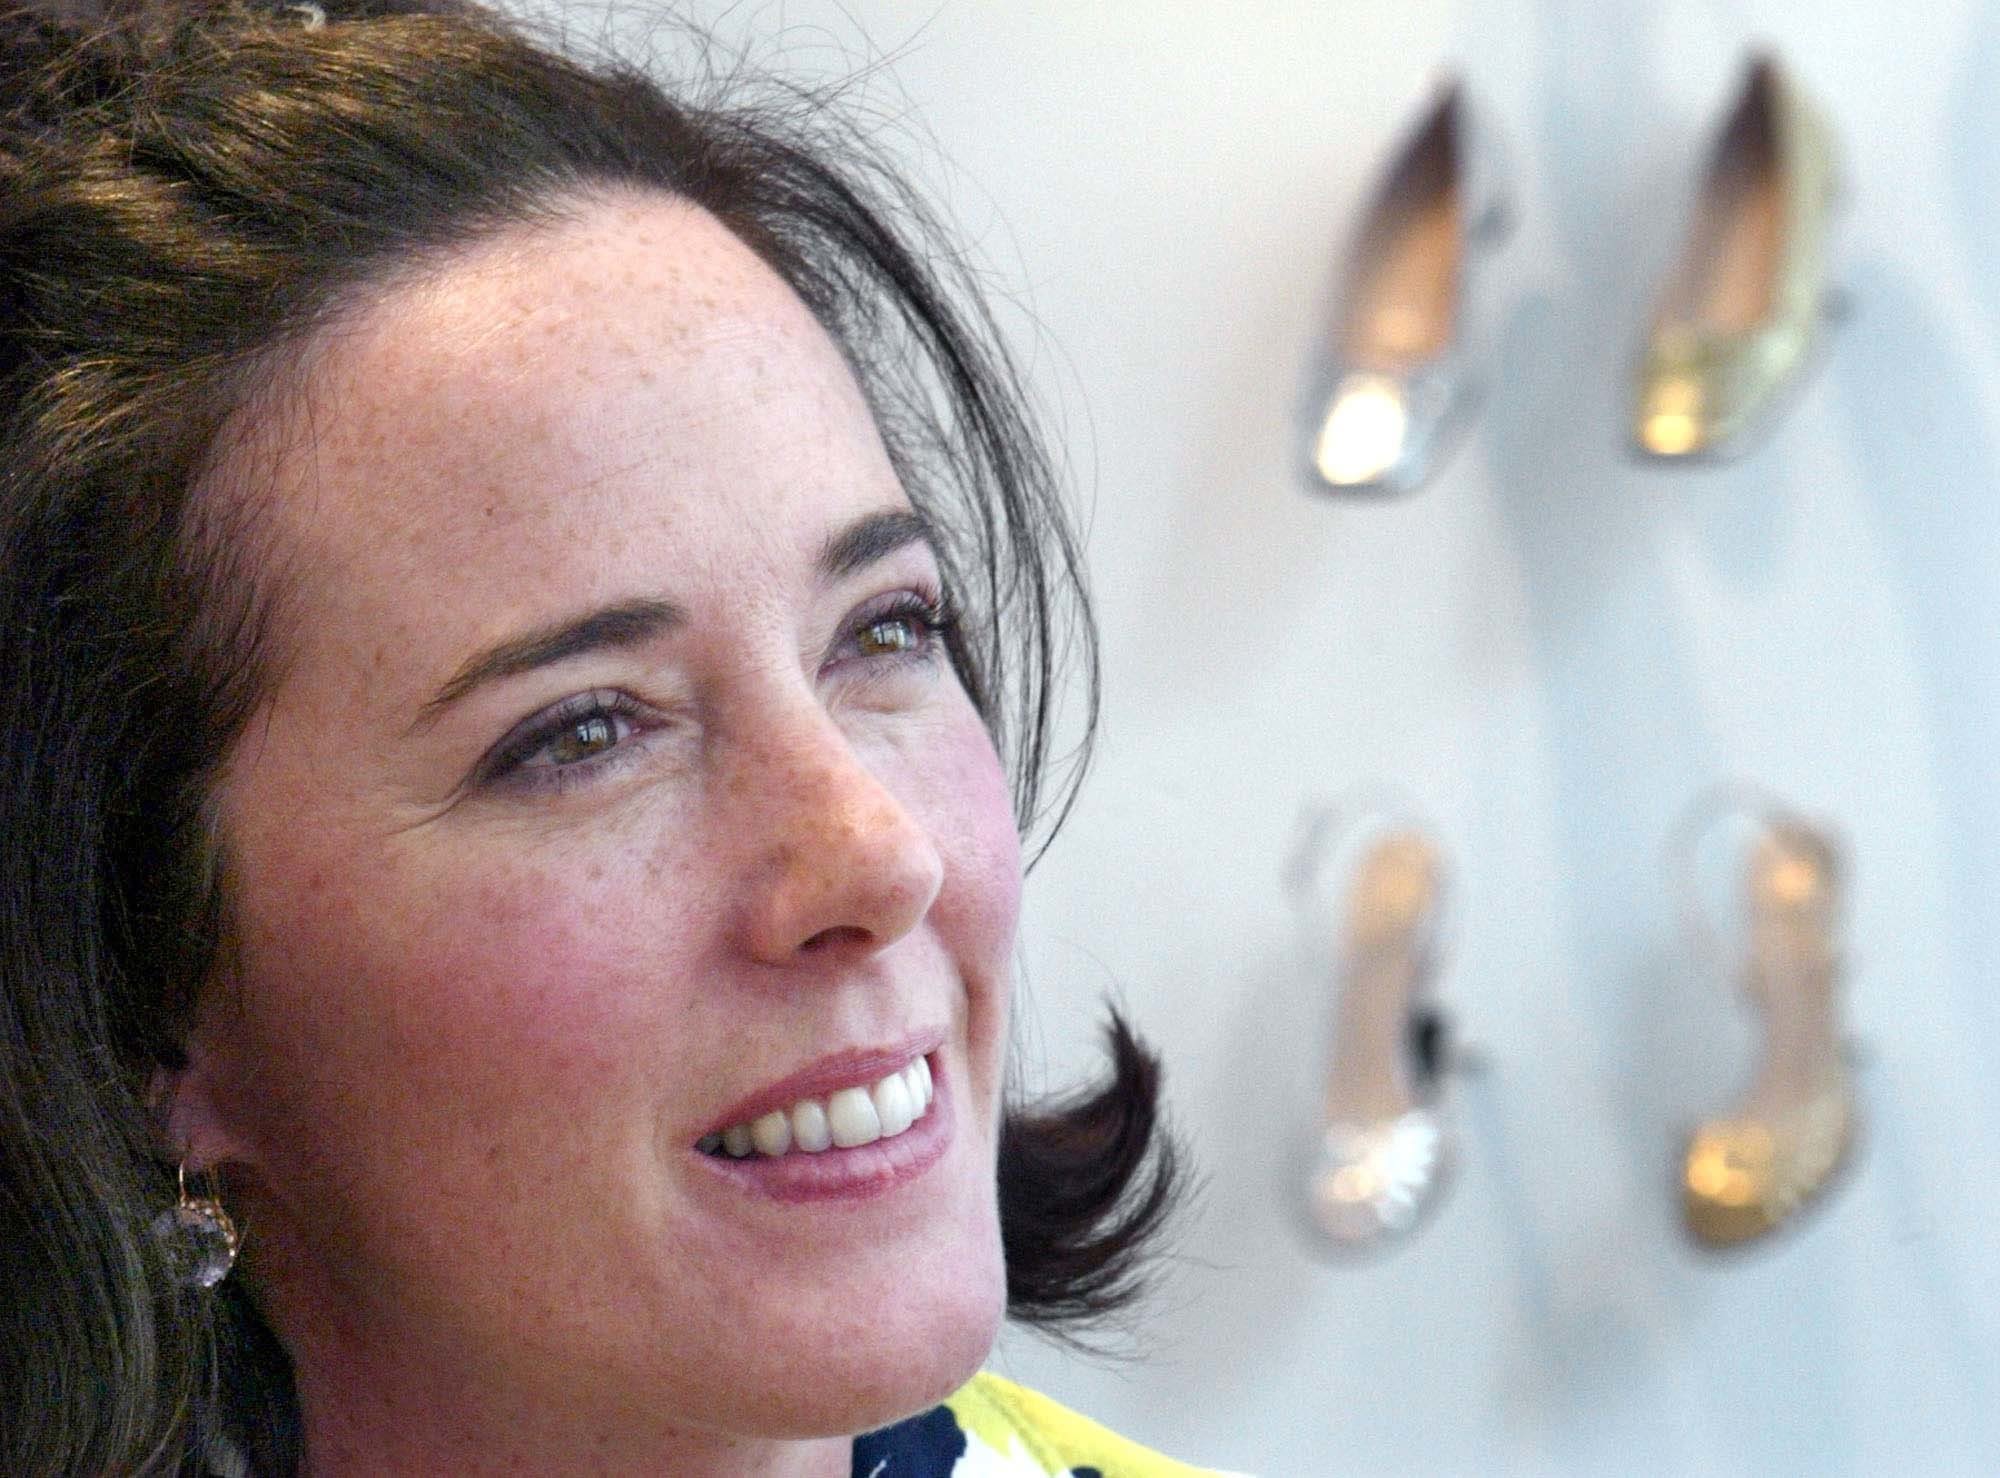 Kate Spade's New Look, Articles